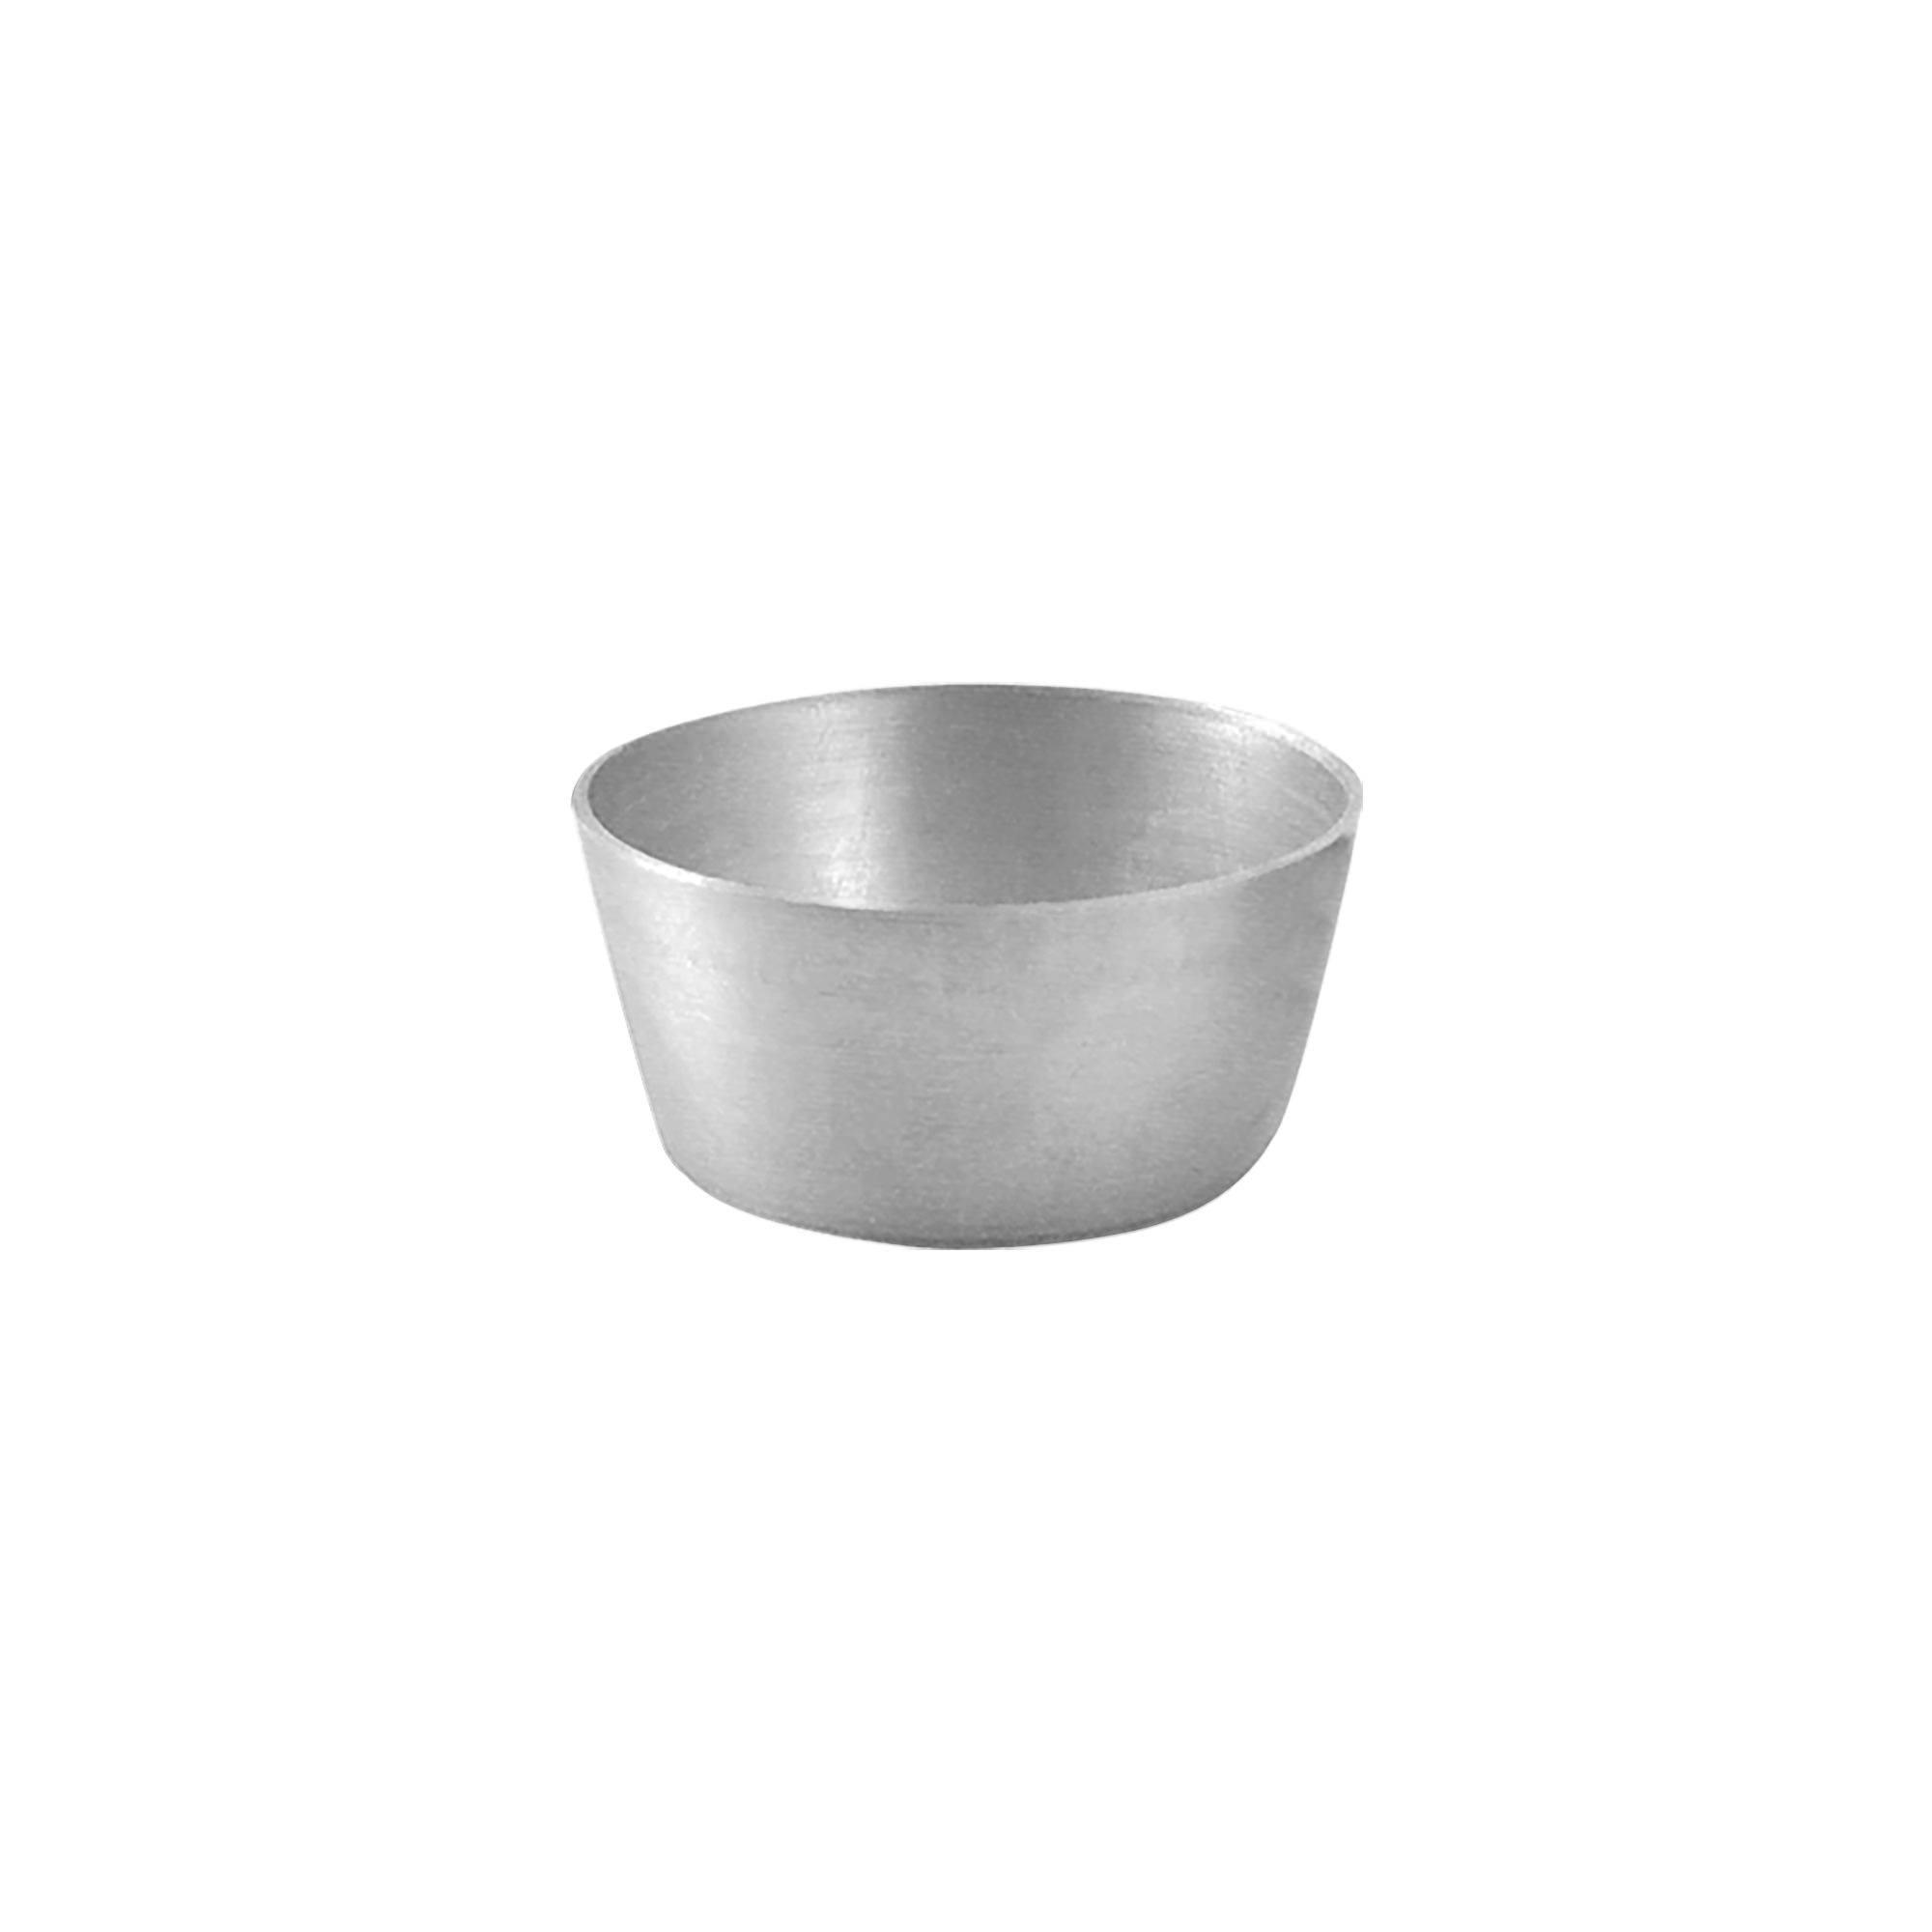 Chef Inox Stainless Steel Pudding Mould 7cm Image 1